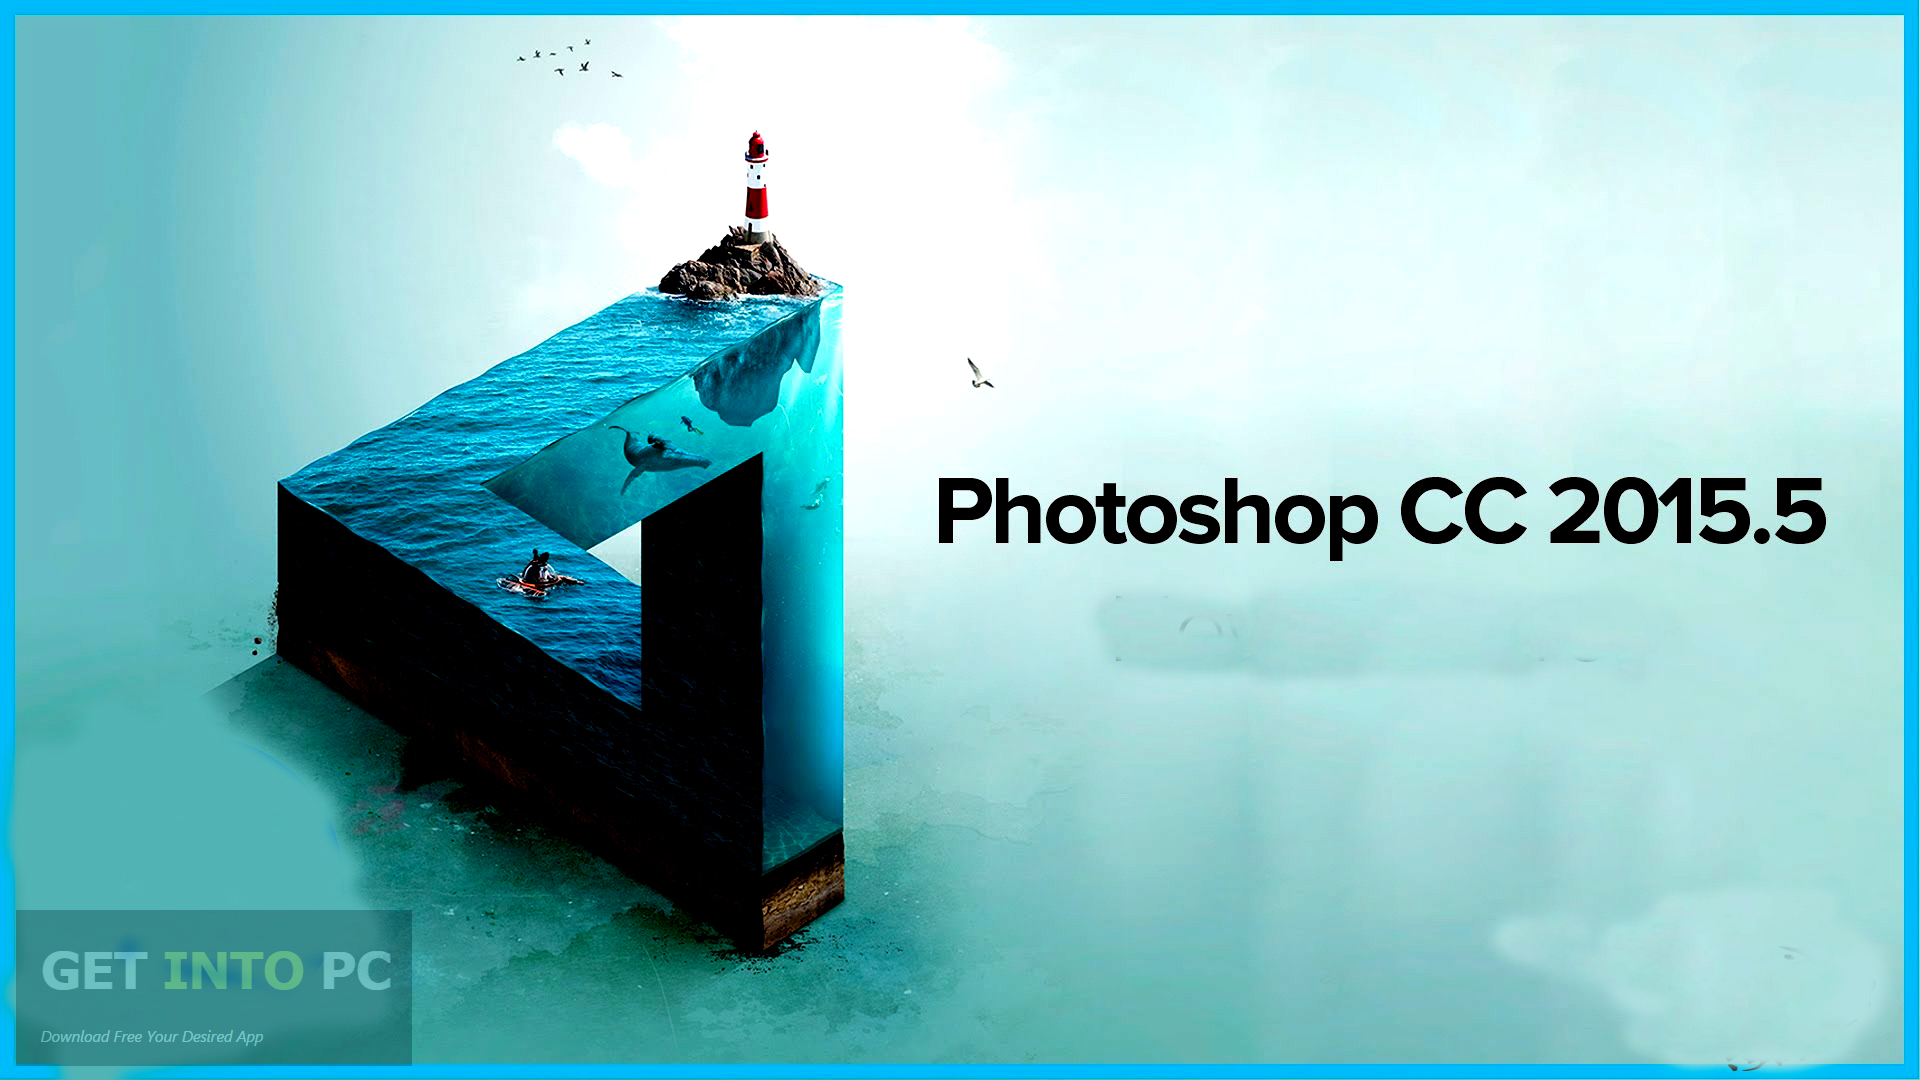 Adobe Photoshop CC 2015.5 v17.0.1 Update 1 ISO Free Download